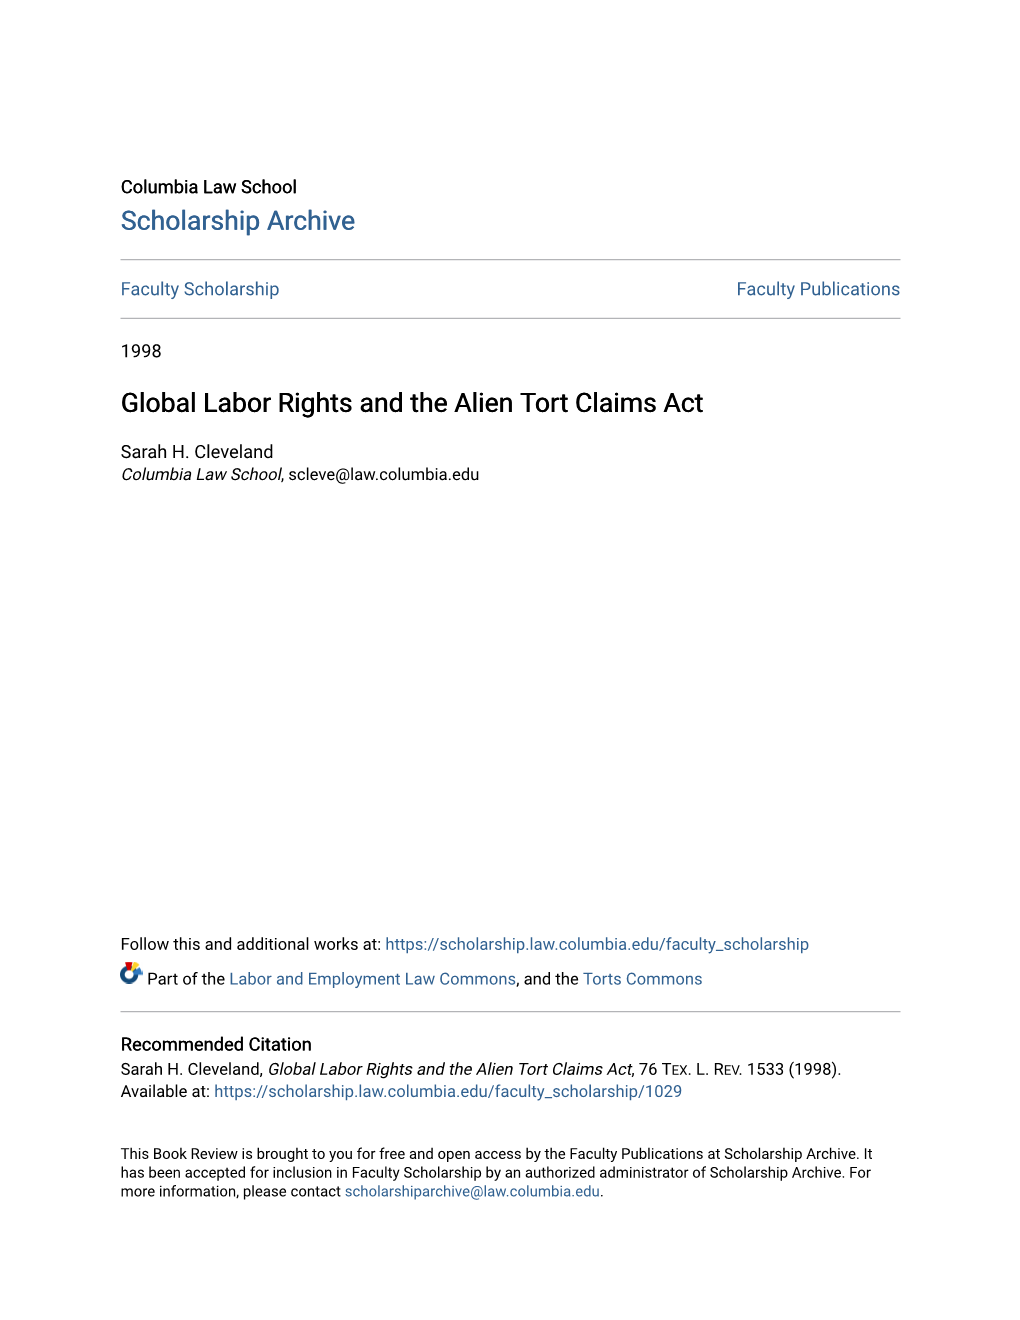 Global Labor Rights and the Alien Tort Claims Act